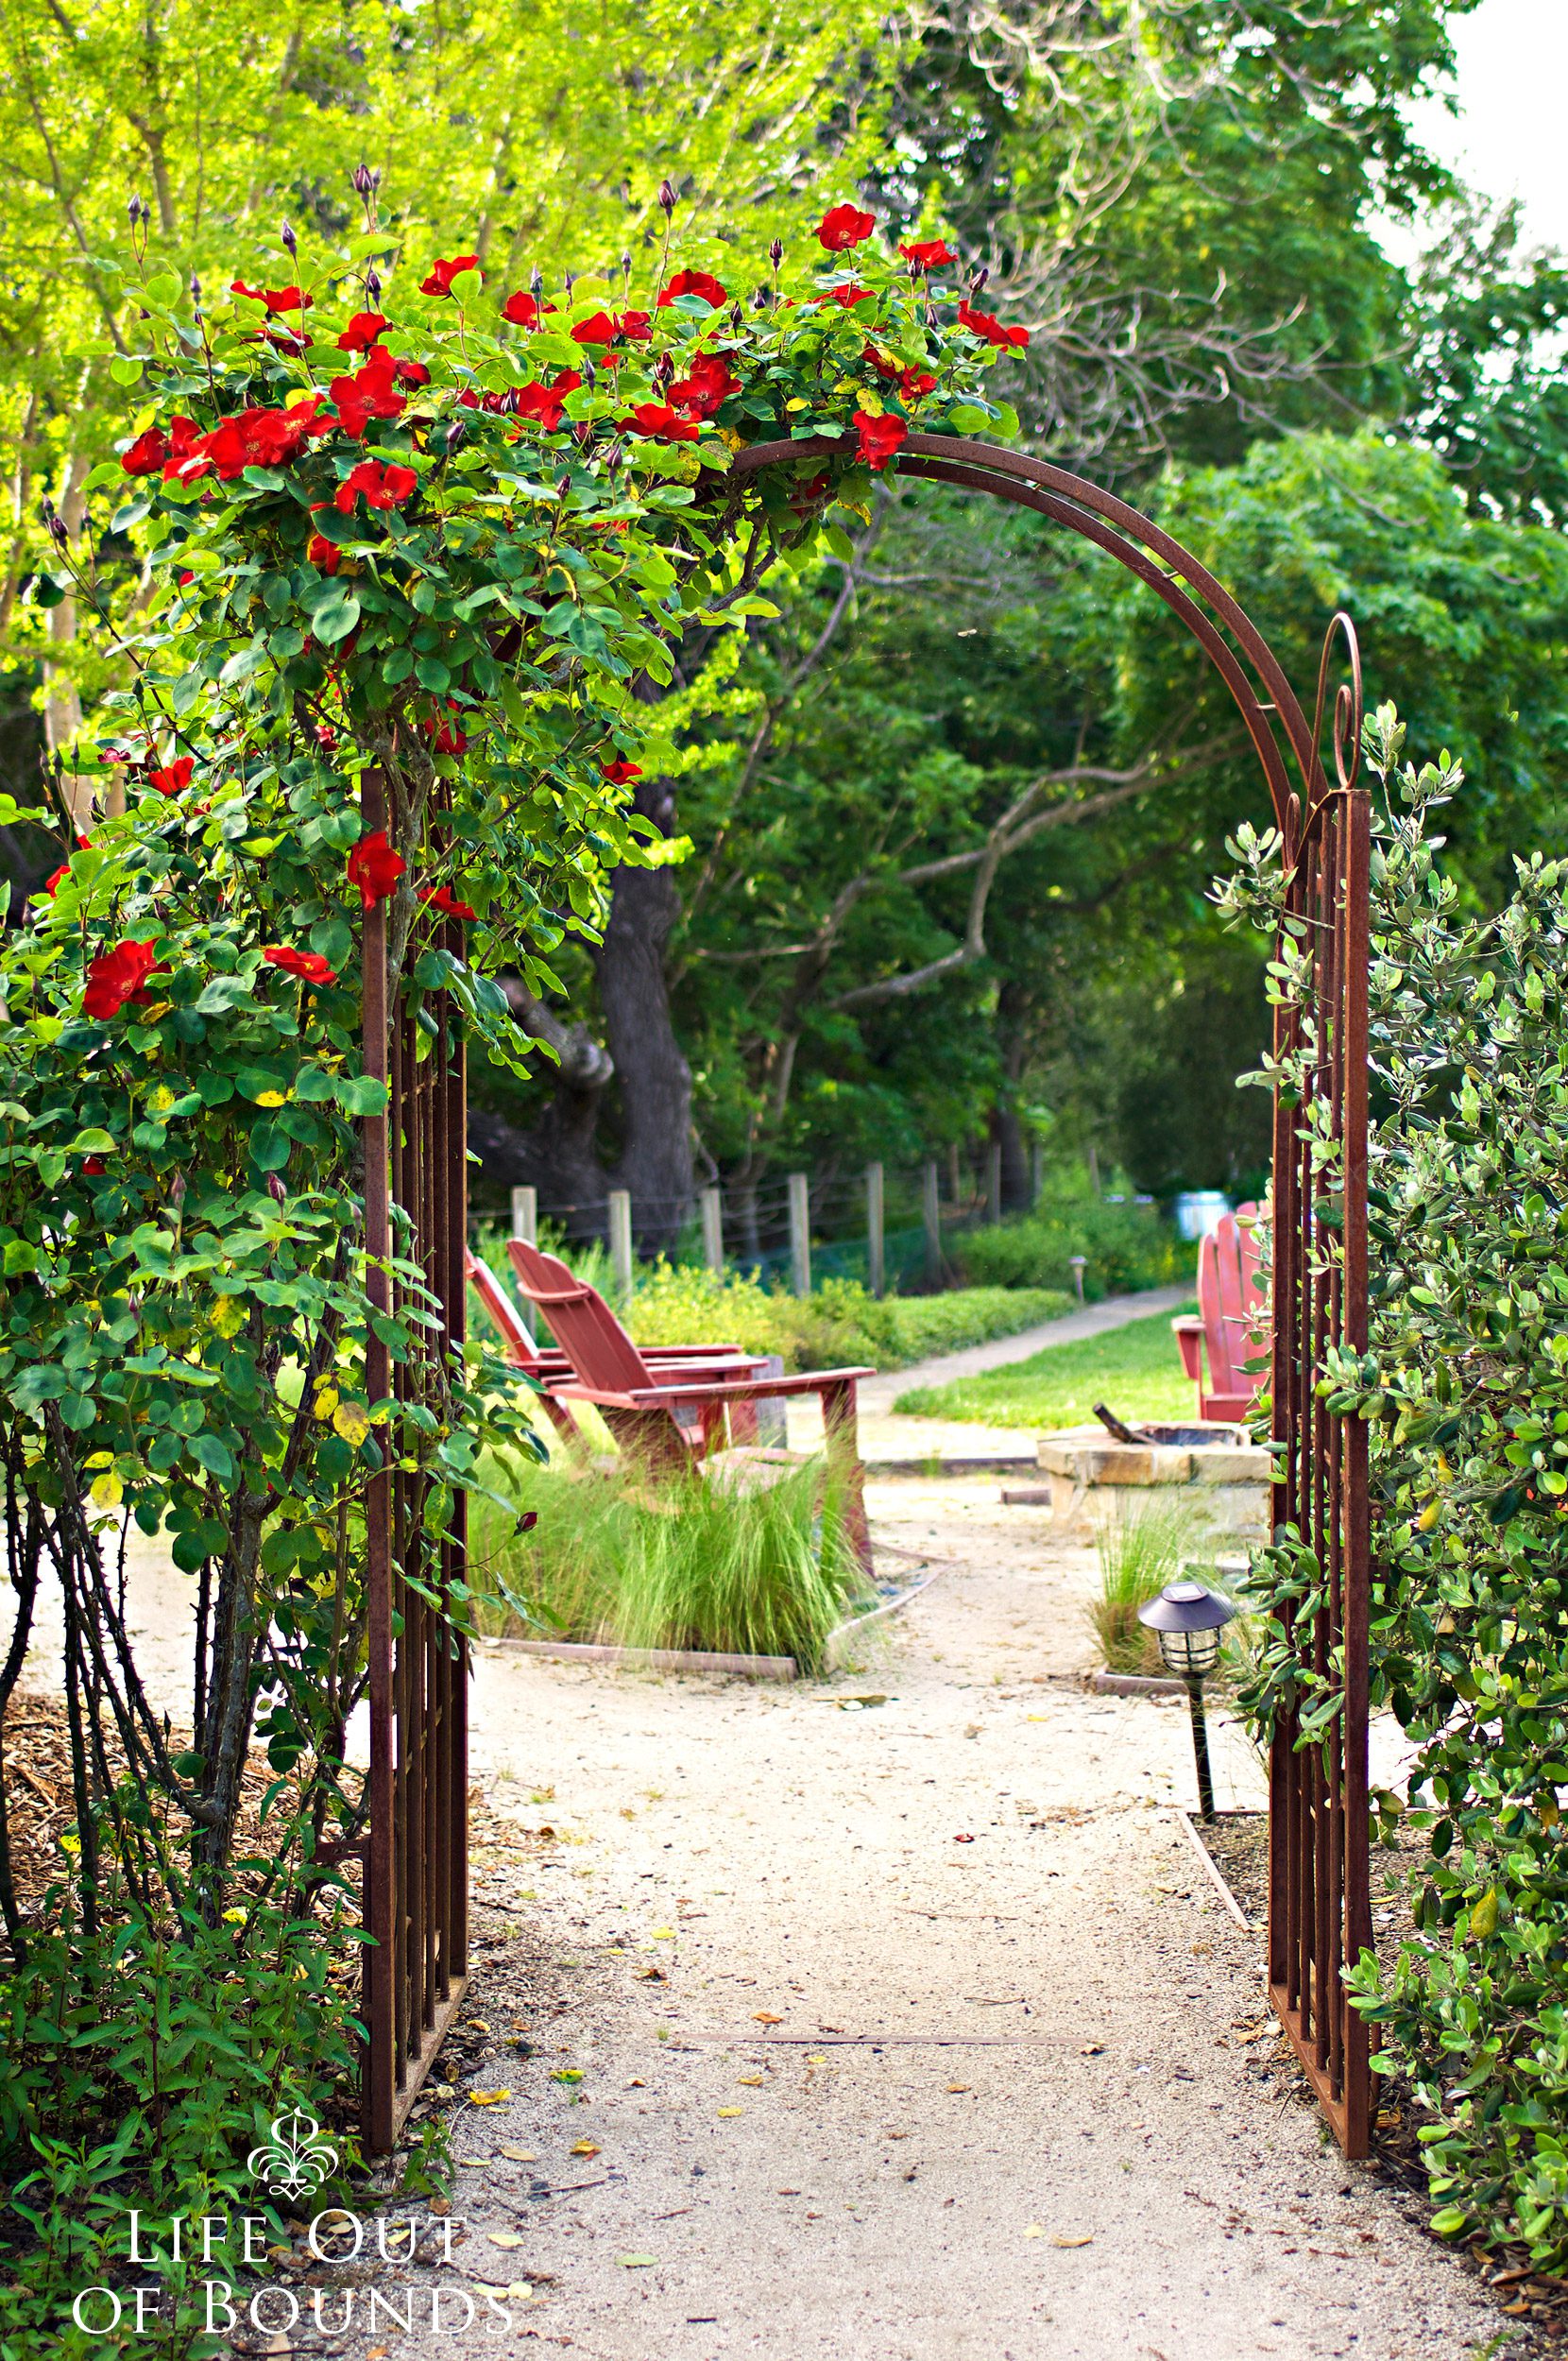 Archway-and-pathway-with-red-climbing-roses-in-the-April-garden-Napa-California